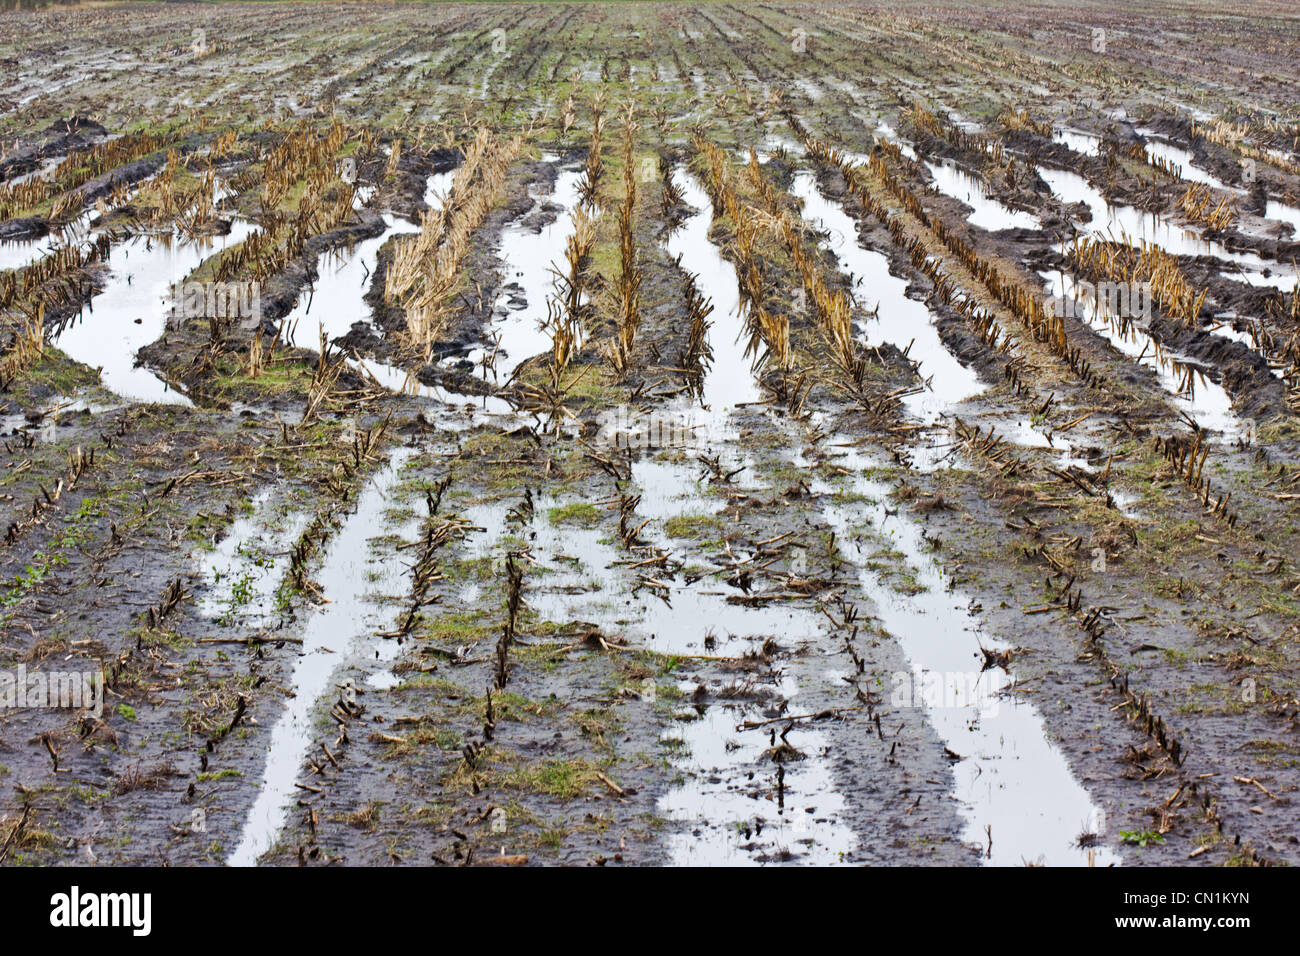 A muddy maize field, flooded after some rainy weeks in winter; tire tracks filled with water. Stock Photo